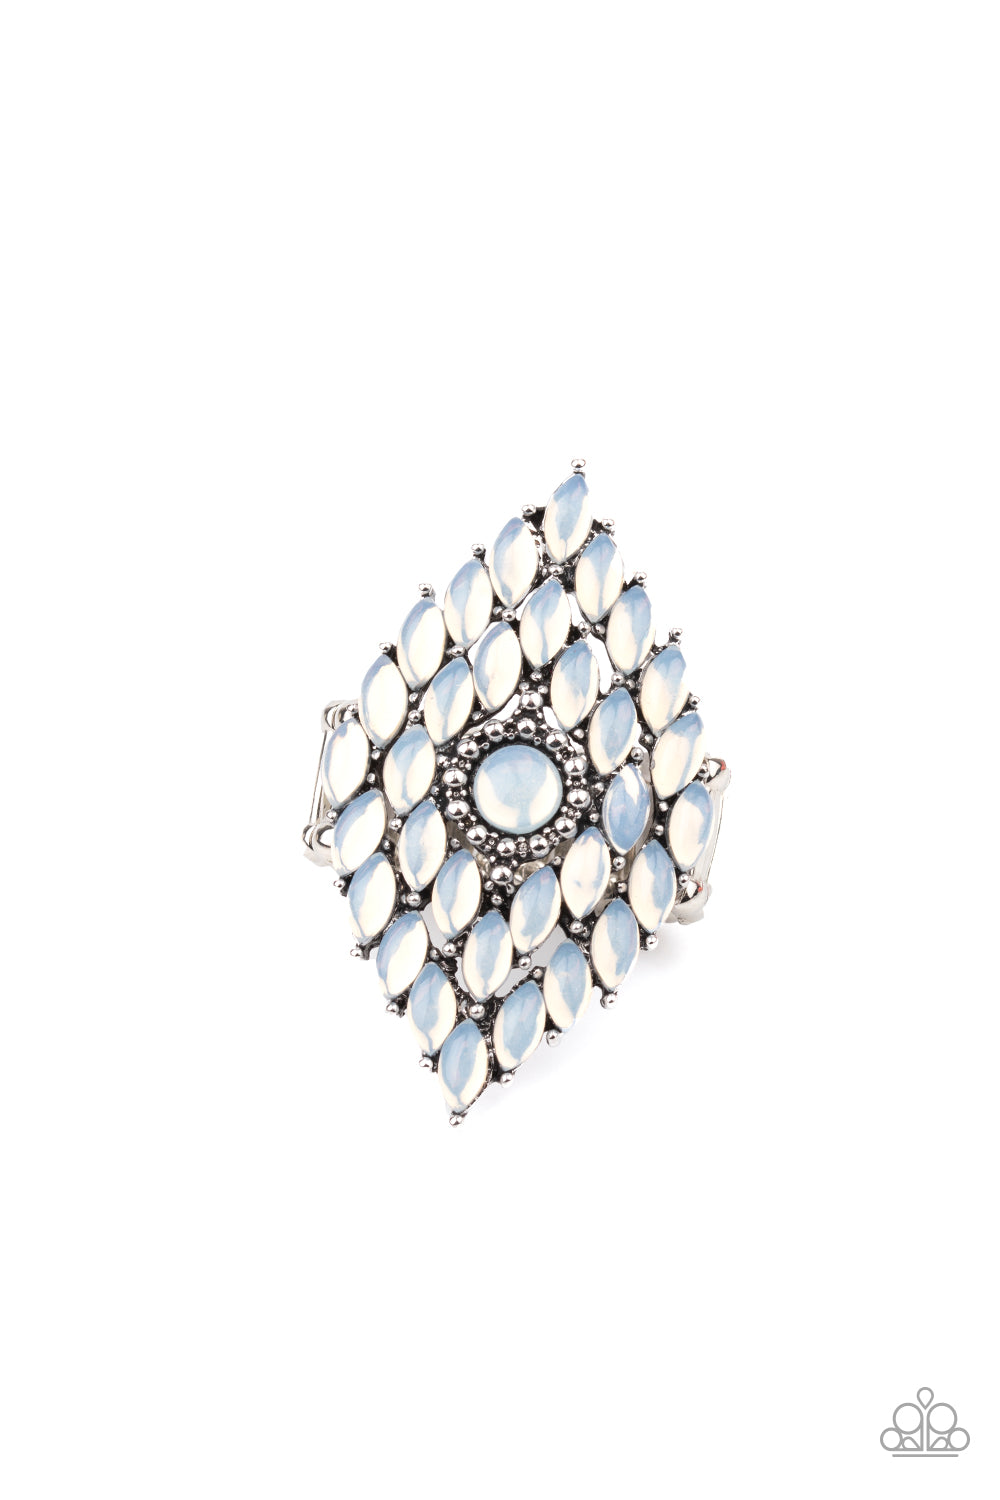 Featuring regal marquise style cuts, rows of iridescent cat's eye stone beads stack around a round cat's eye stone beaded center, creating an ethereal centerpiece atop the finger. Features a stretchy band for a flexible fit.  Sold as one individual ring.